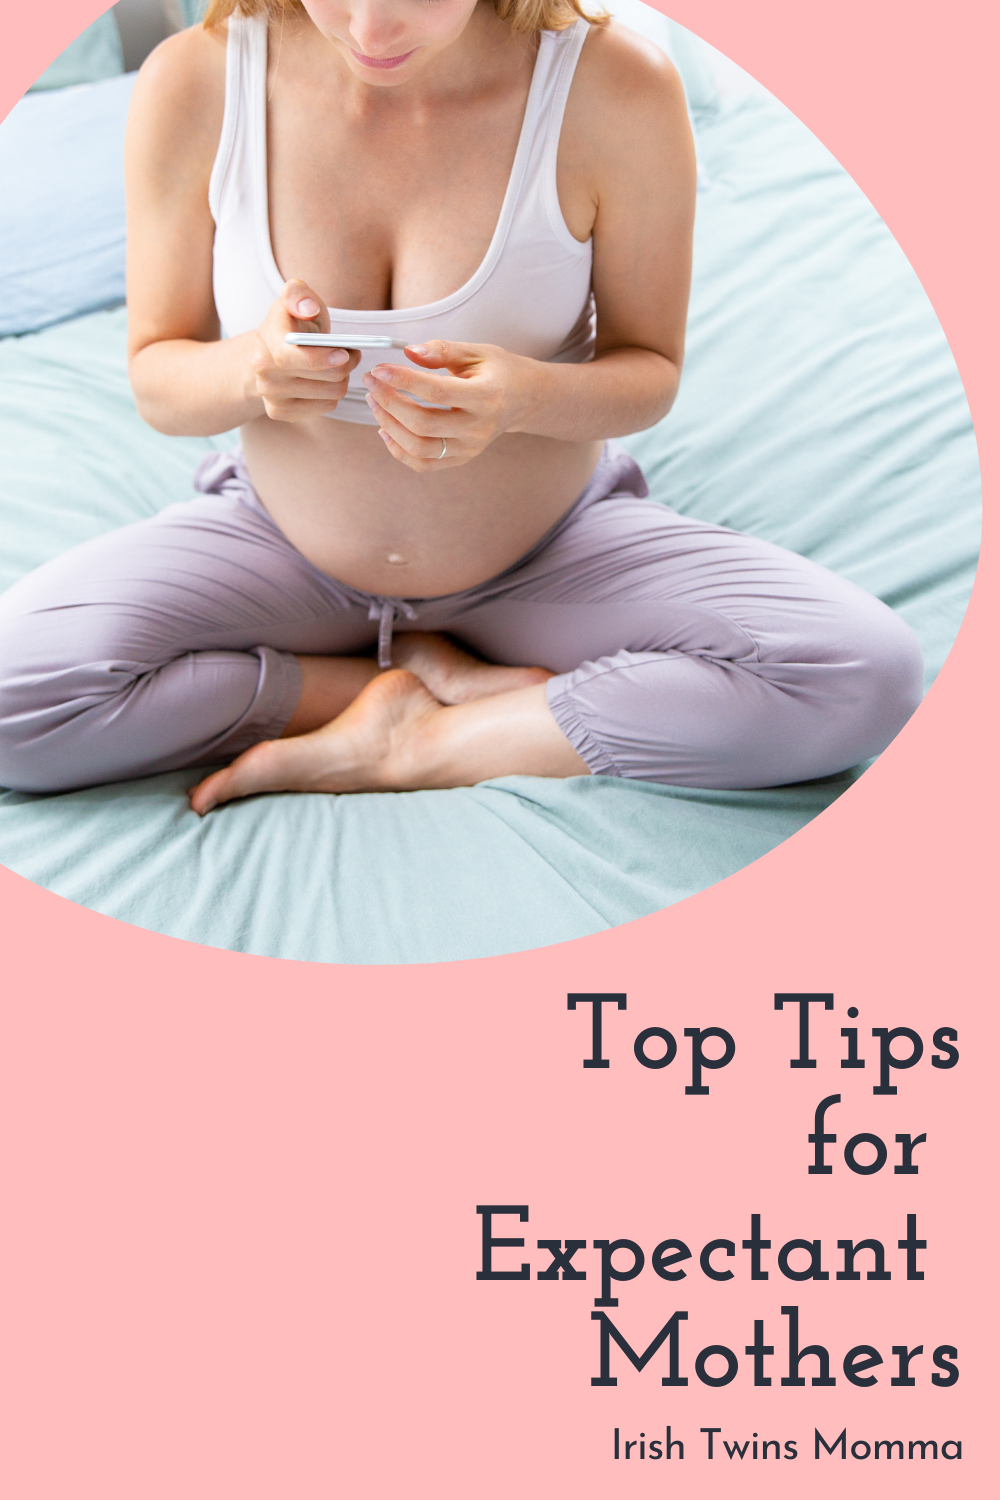 Top Tips for Expectant Mothers